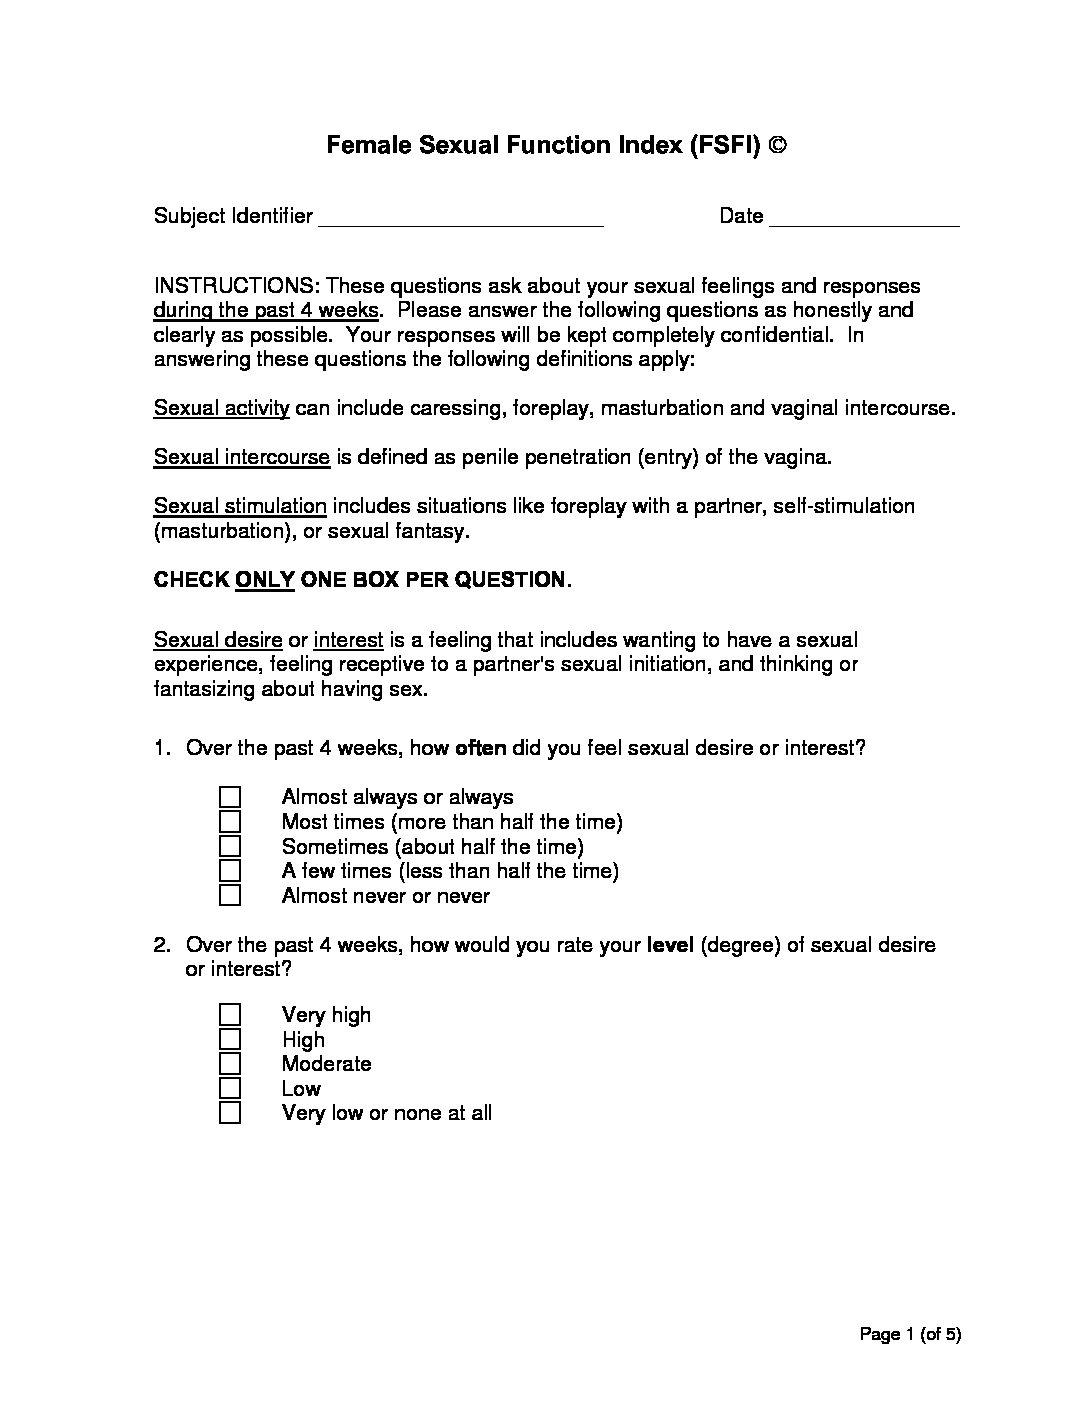 Female Sexual Function Index Questionnaire 2000 Biofunctional Med 6526